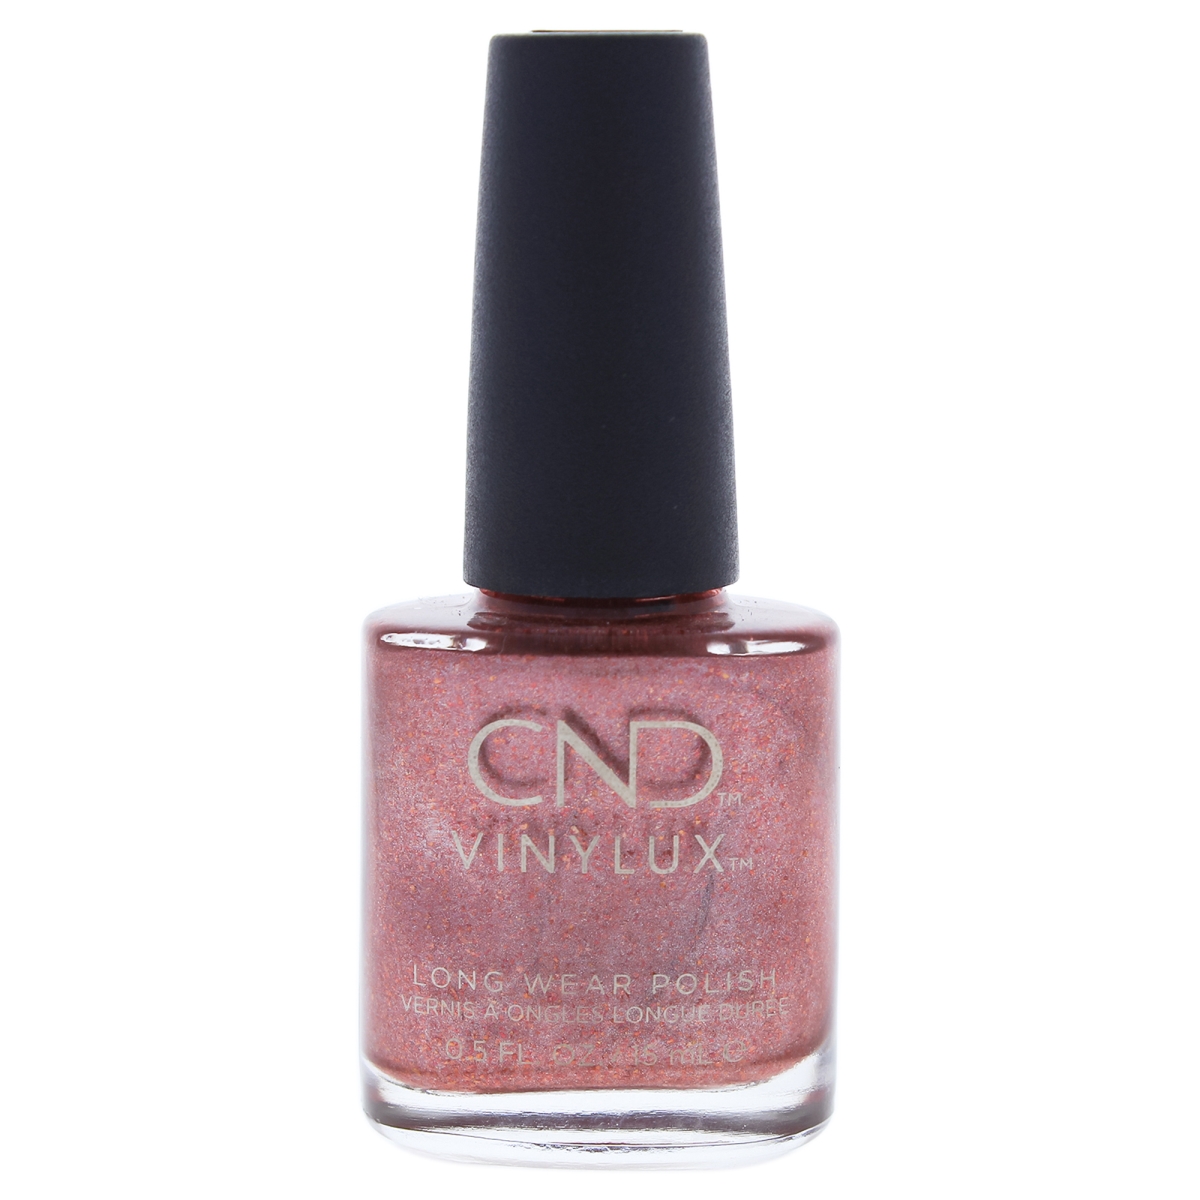 Picture of CND I0087639 Vinylux Weekly Nail Polish for Women - 212 Untitled Bronze - 0.5 oz